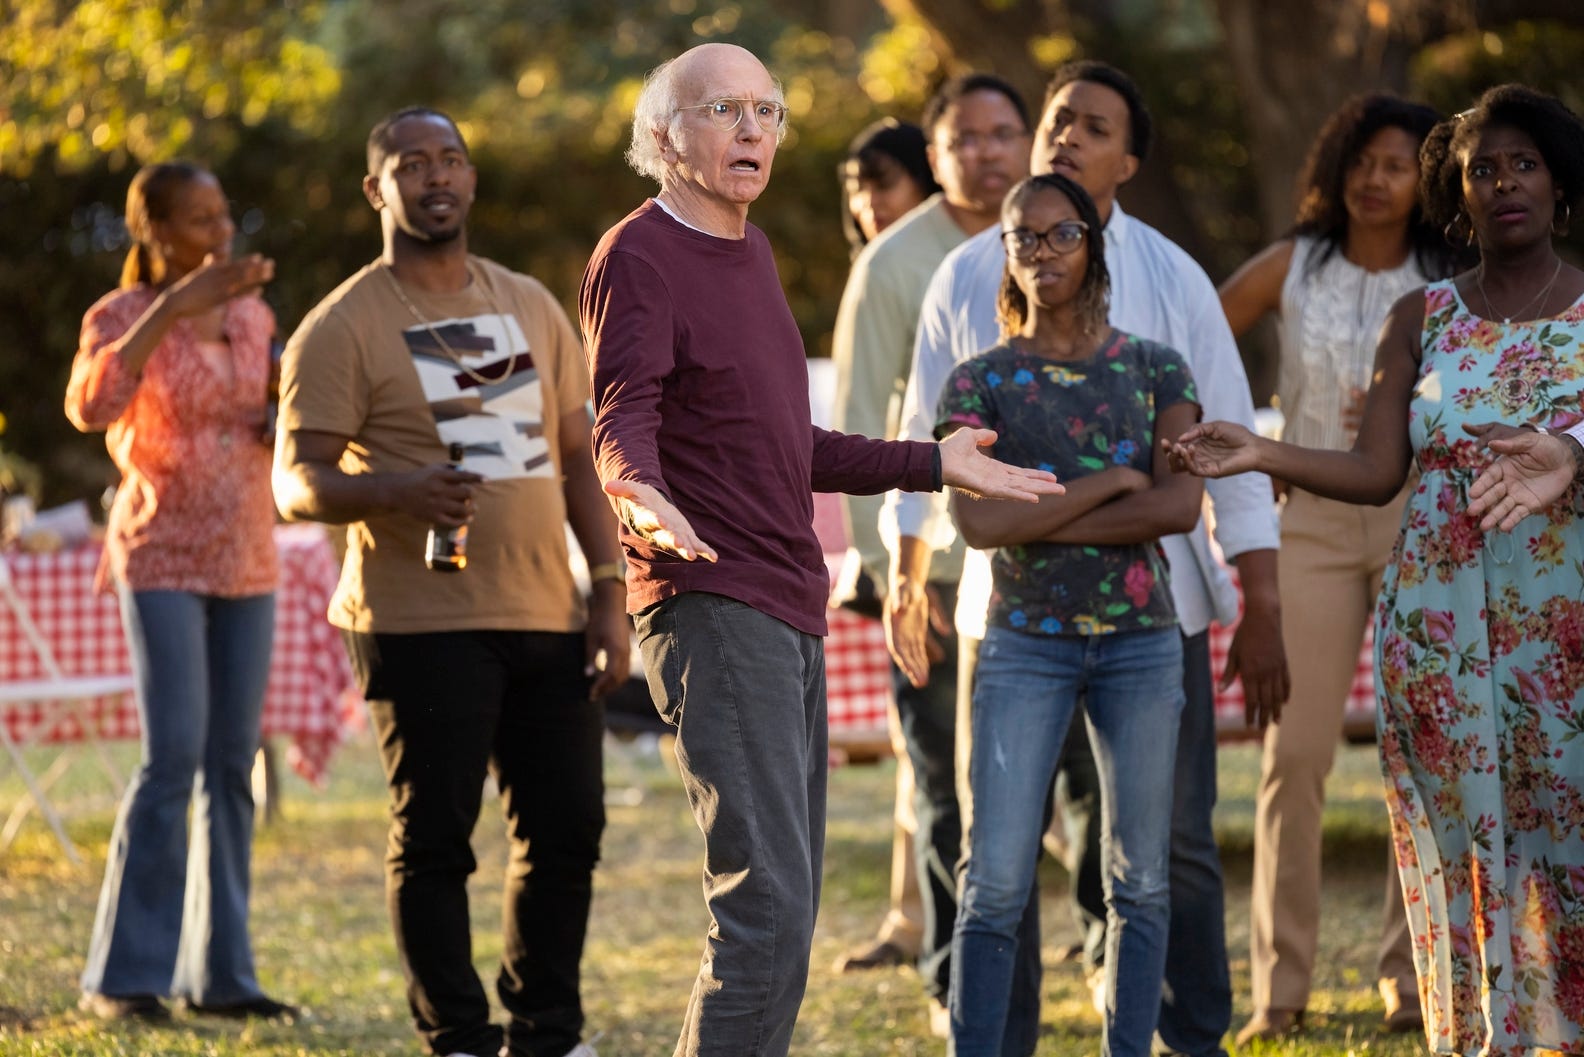 Review: Curb Your Enthusiasm, “The Lawn Jockey”